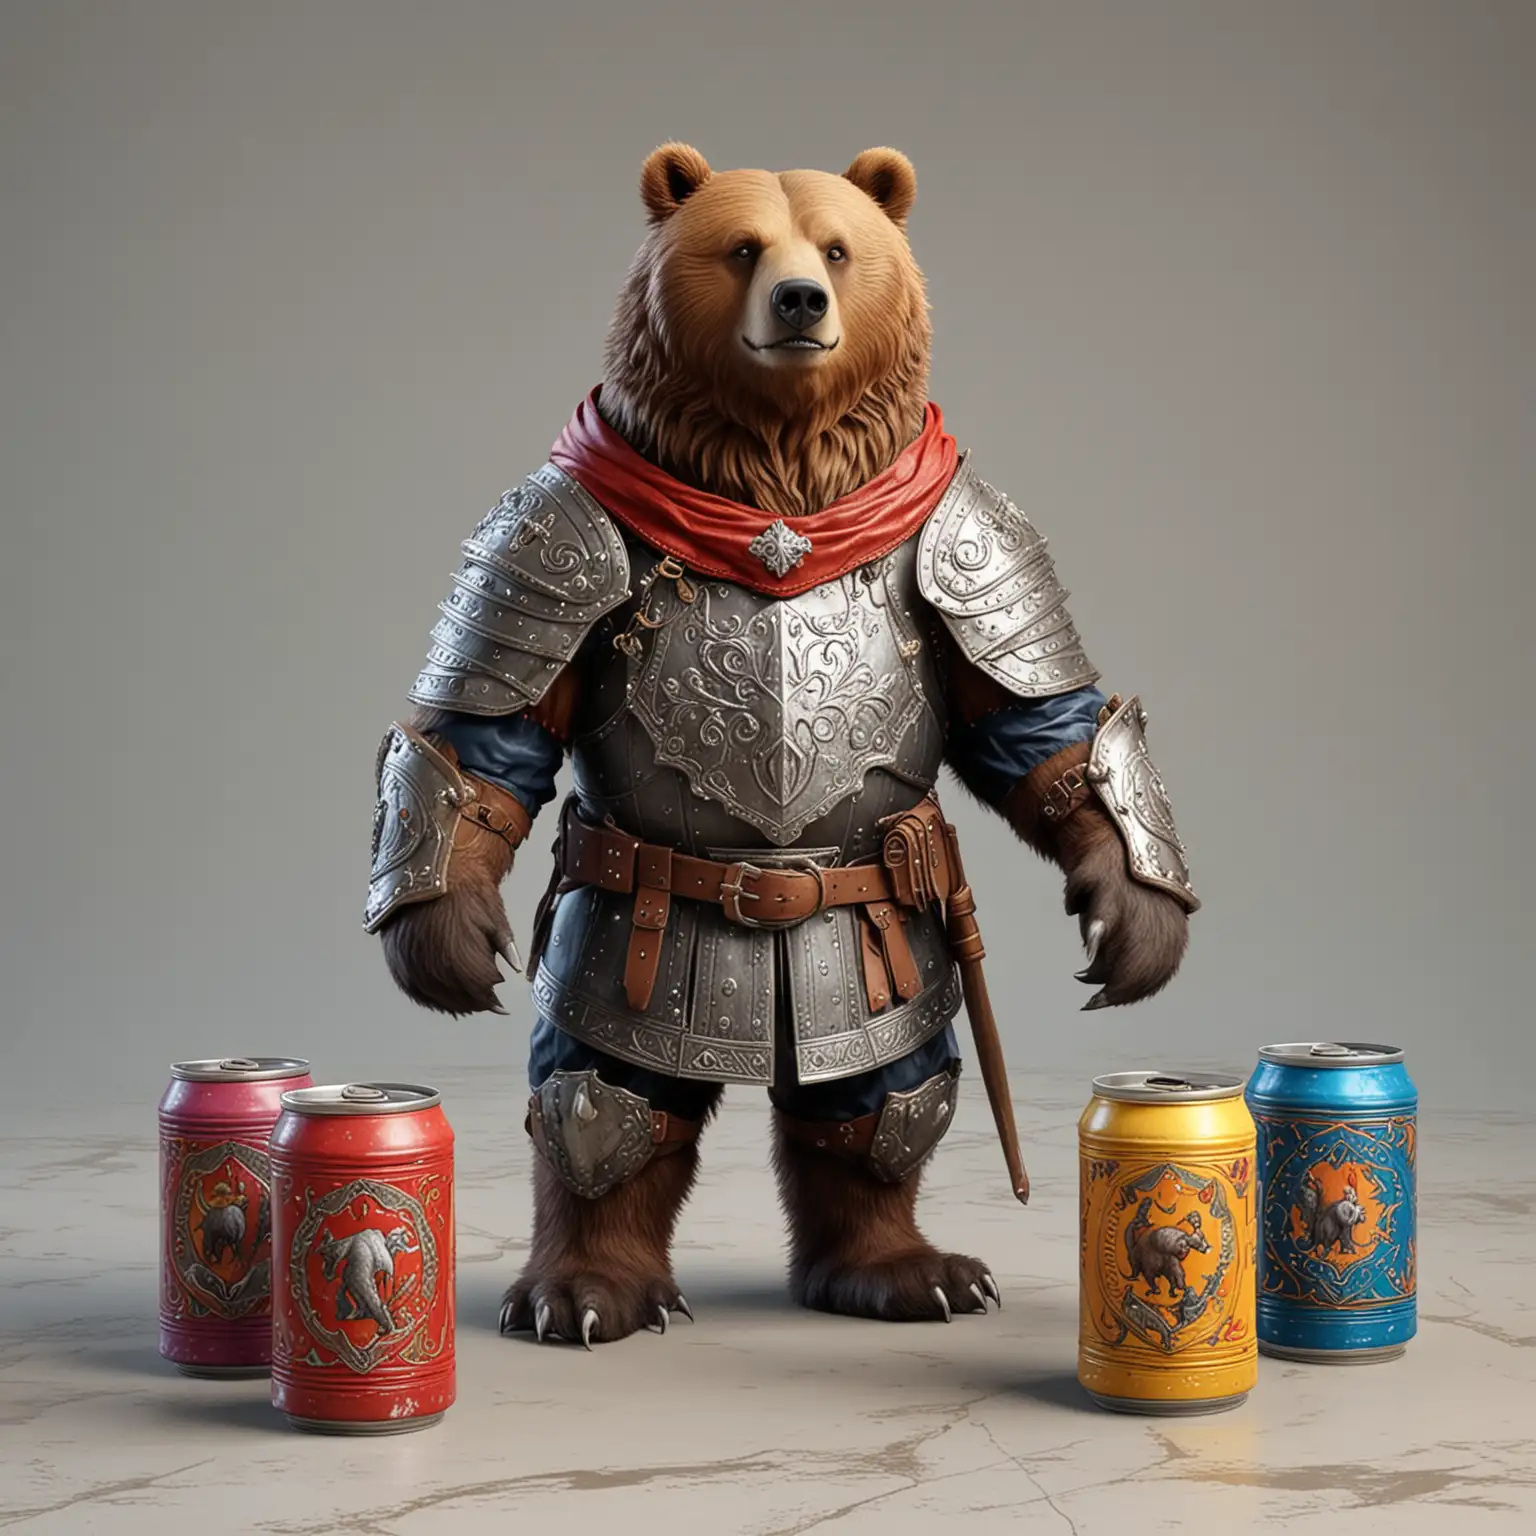 Realistic Cute Grizzly Knight Standing in Colorful Medieval Courtyard